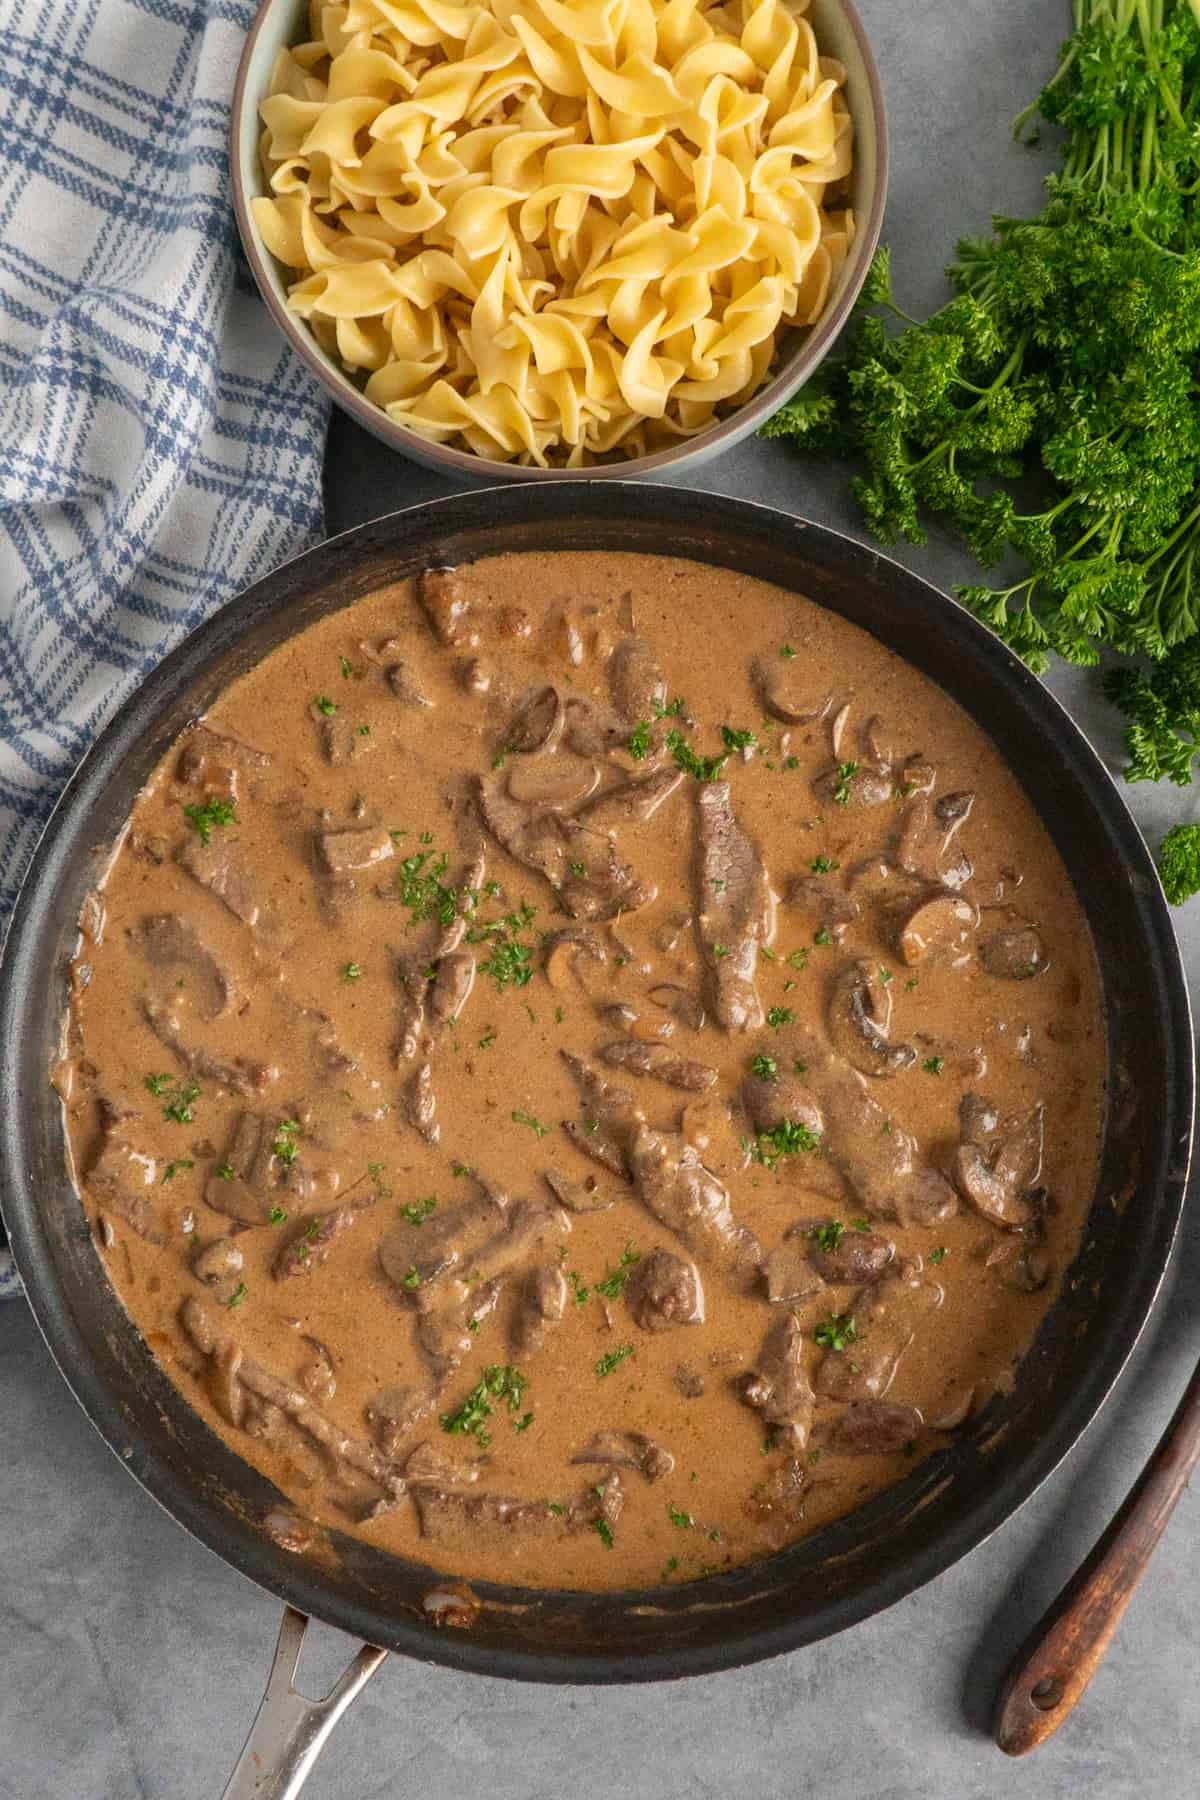 Overhead look at beef stroganoff in a skillet.